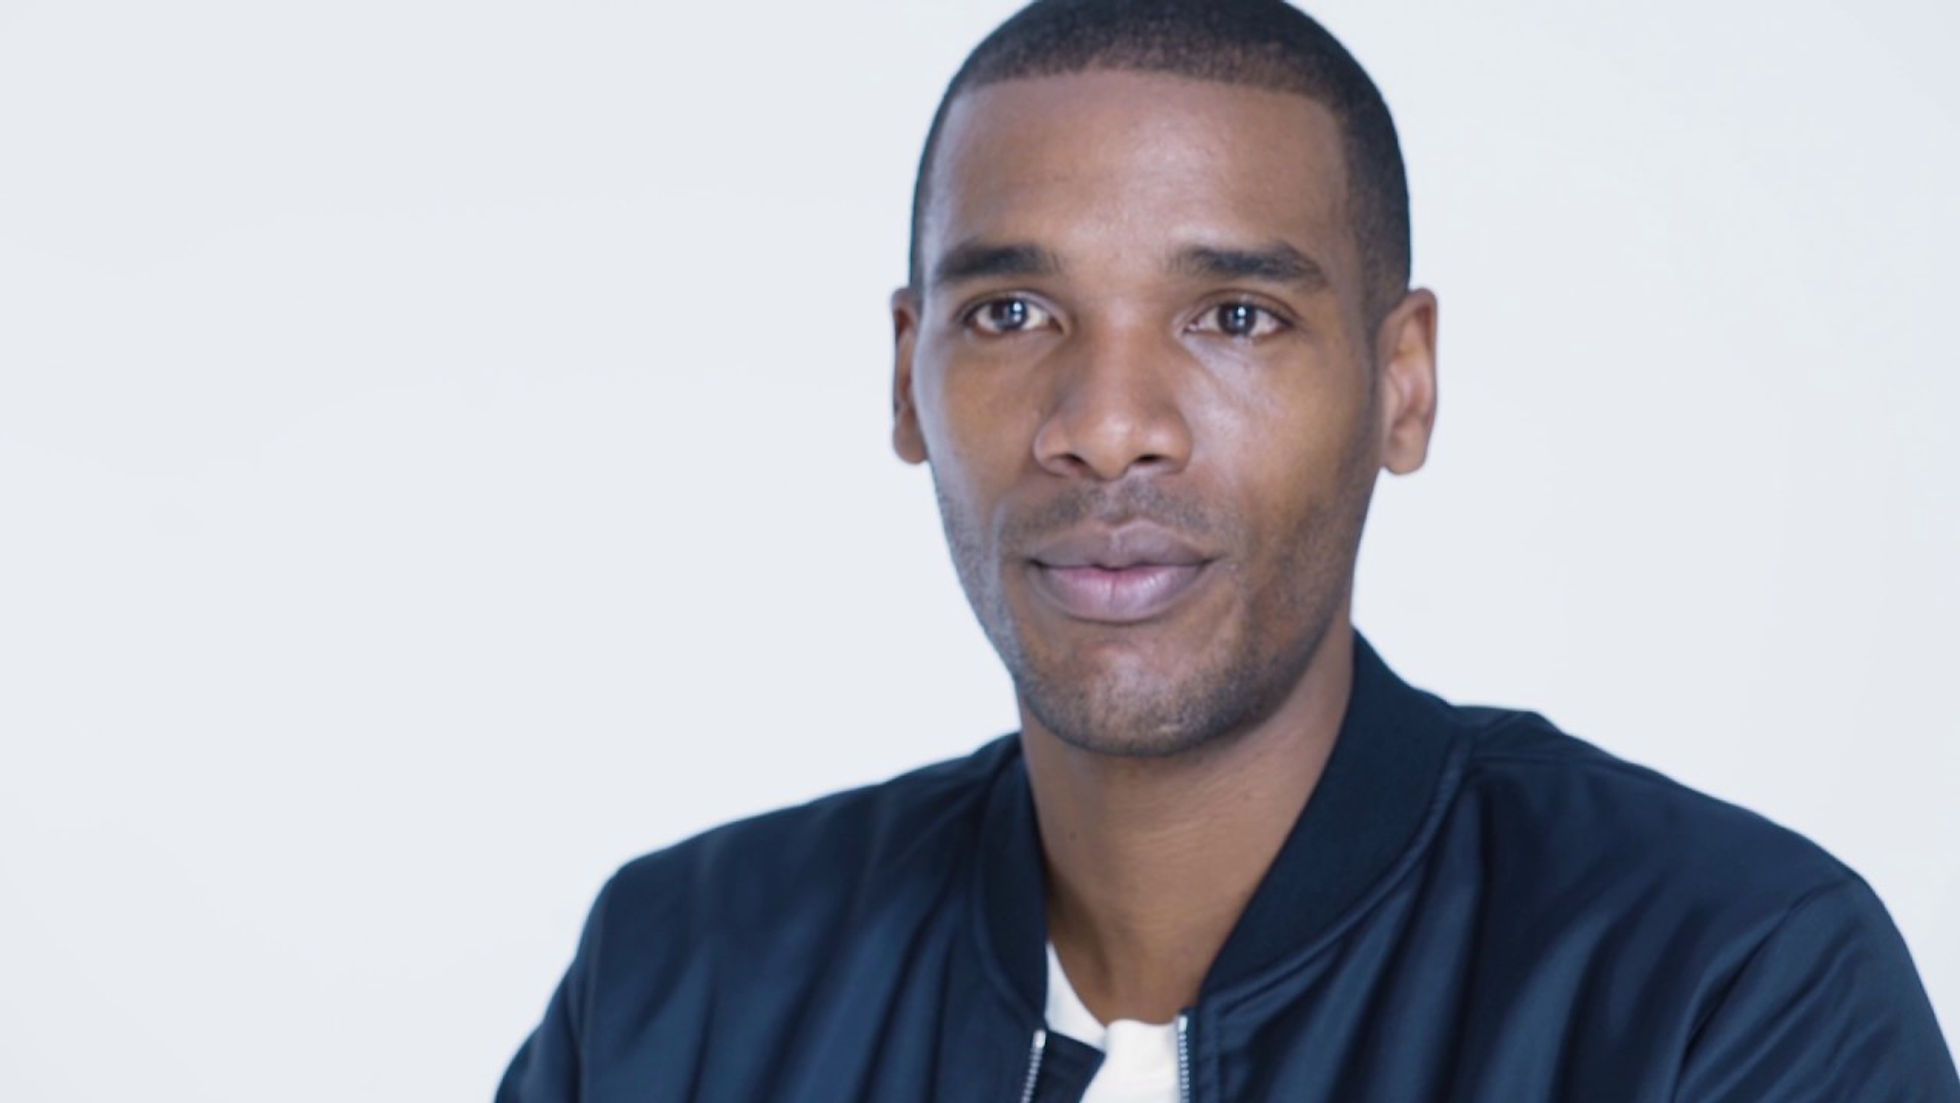 Interview with Parker Sawyers for MATCHESFASHION.COM